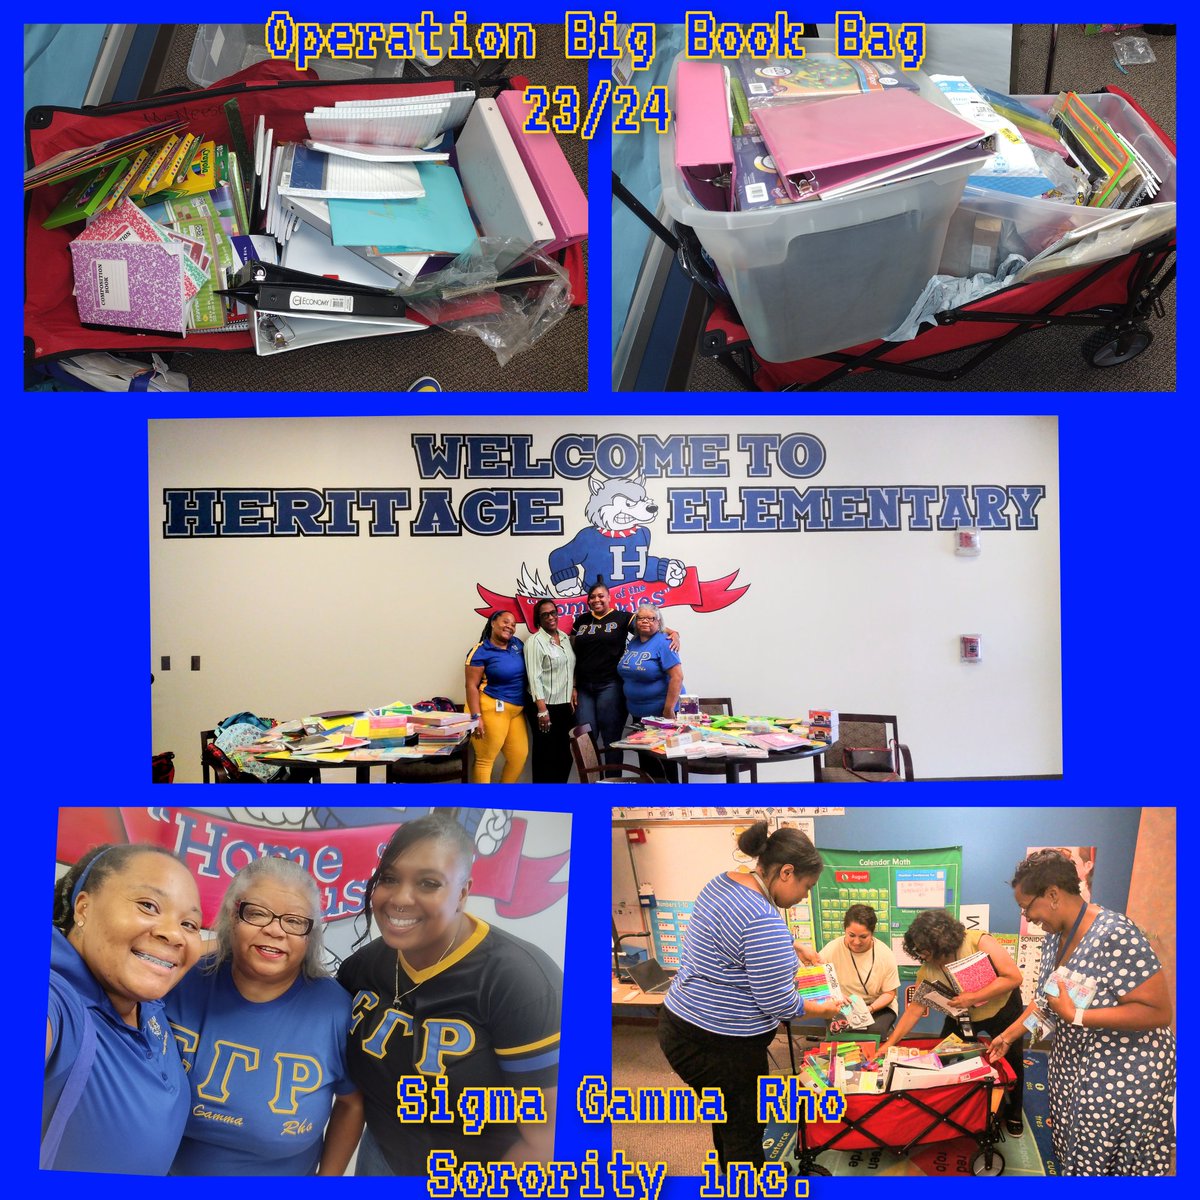 Thank you @sigmagammarho  for your love gift Operation Big Book Bag 23-24.